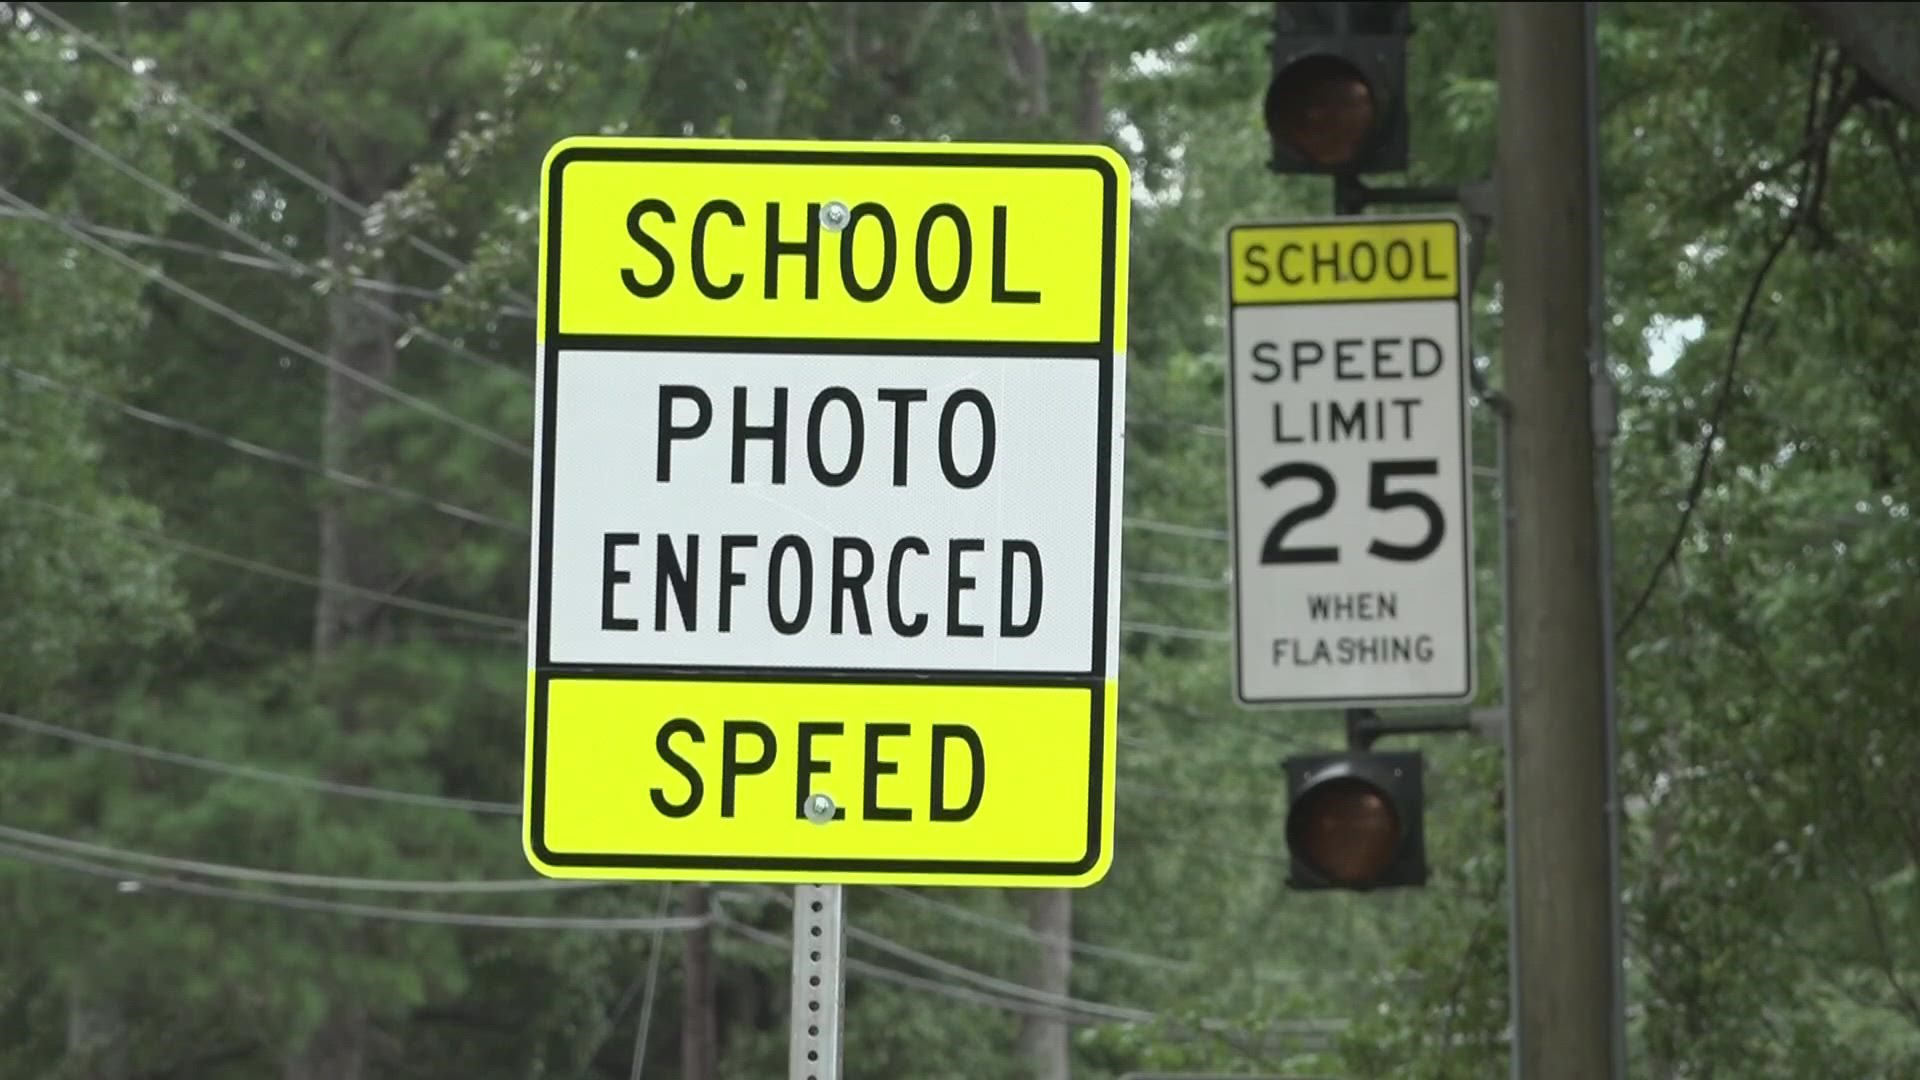 HB301 would drastically reduce the amount of money drivers would pay if they’re caught driving too fast on school zone cameras.